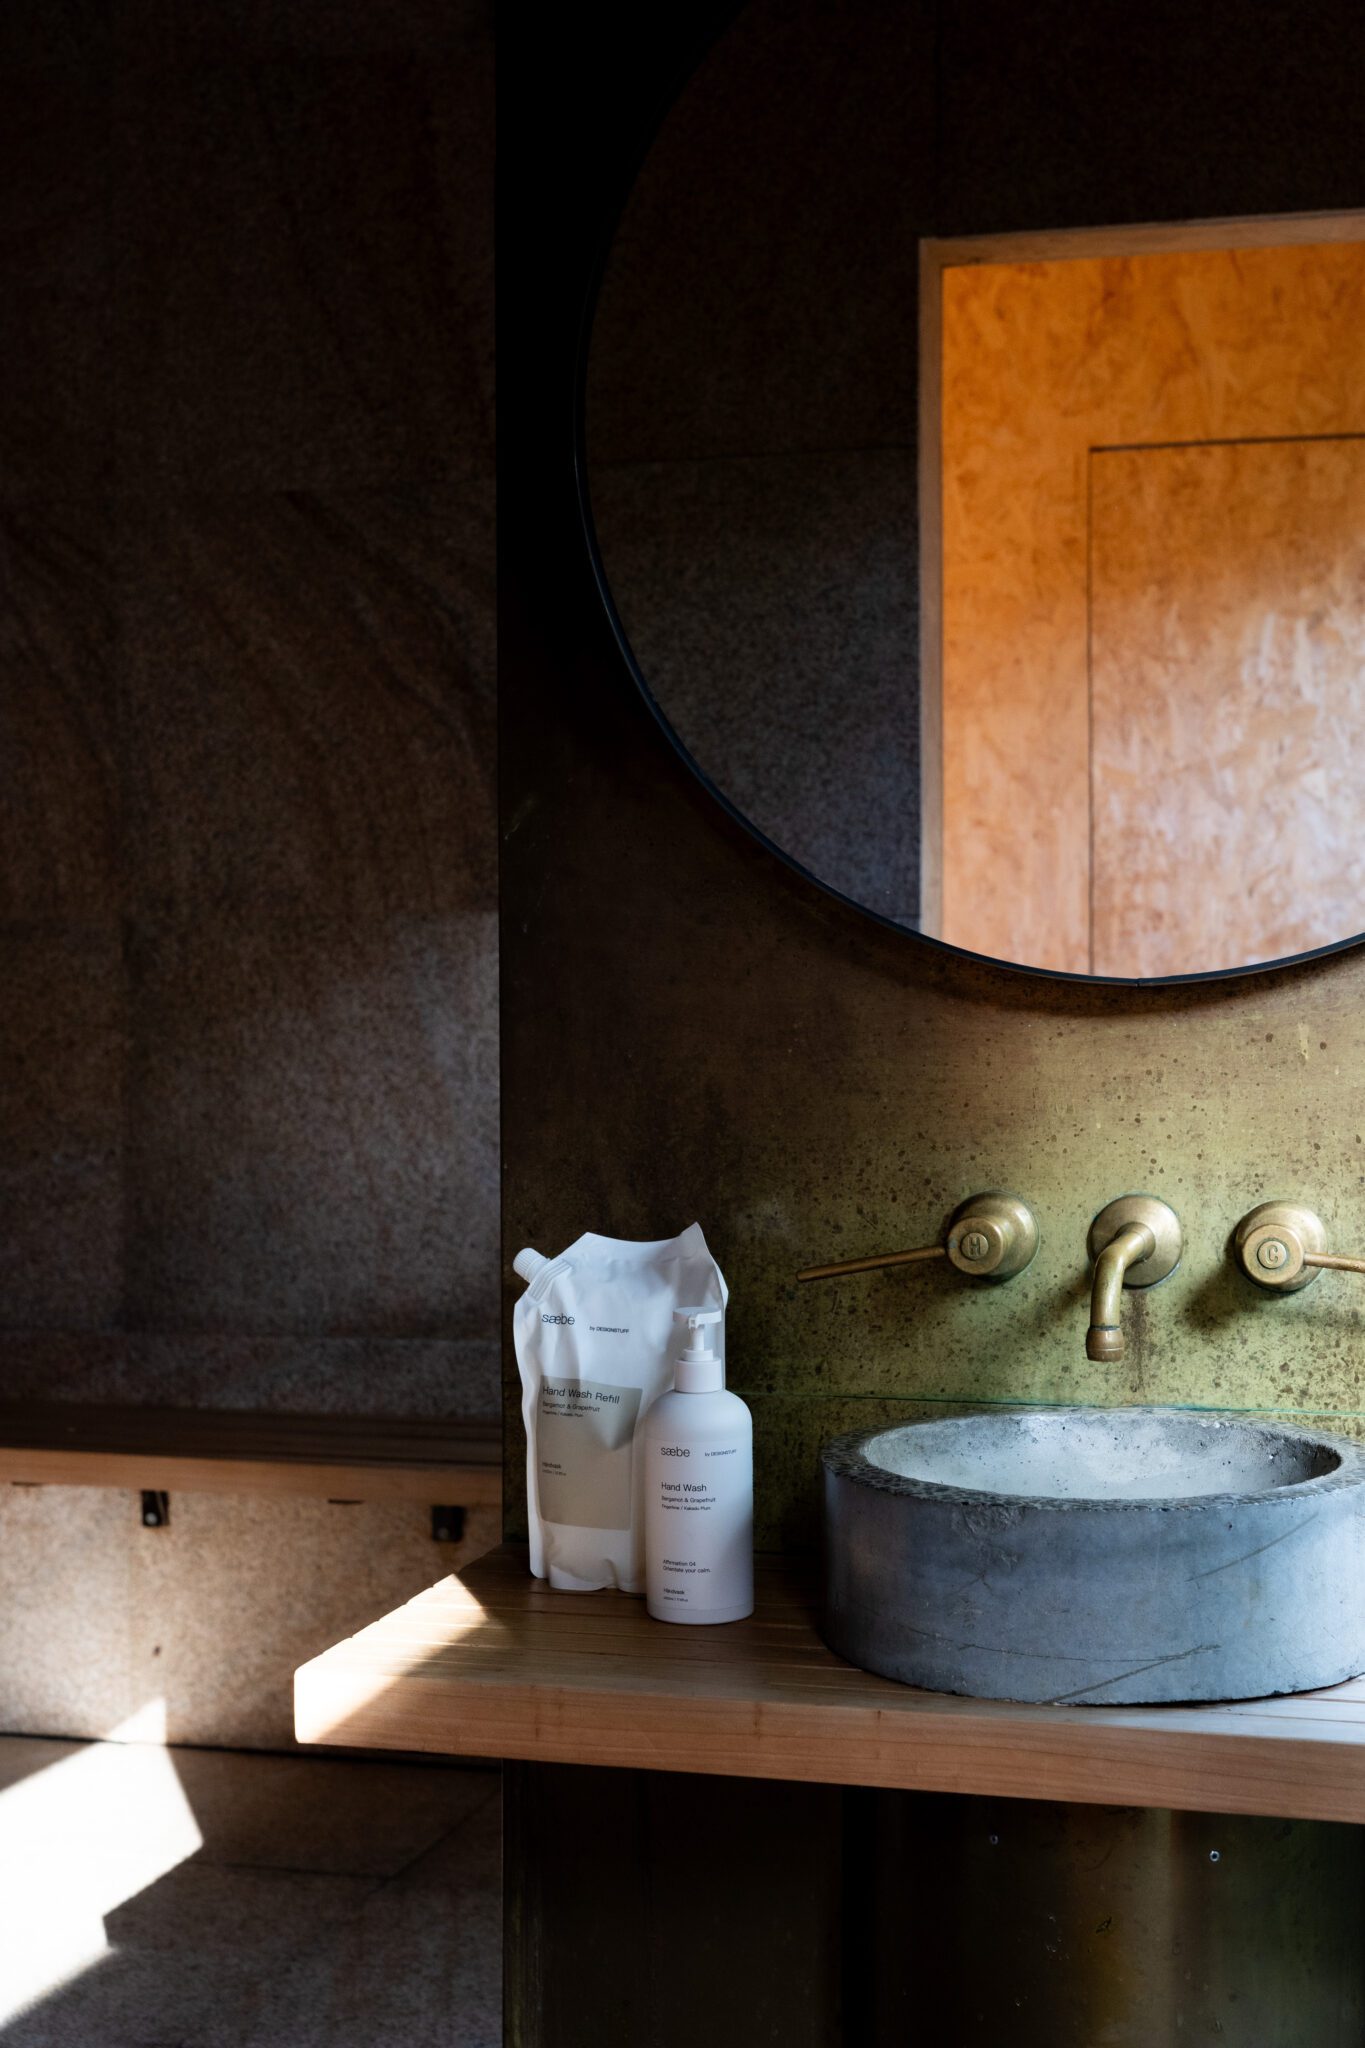 saebe by Designstuff hand wash and saebe by Designstuff hand wash refill on a bench in a spa-esque bathroom next to a stone sink with brass details and large round mirror.